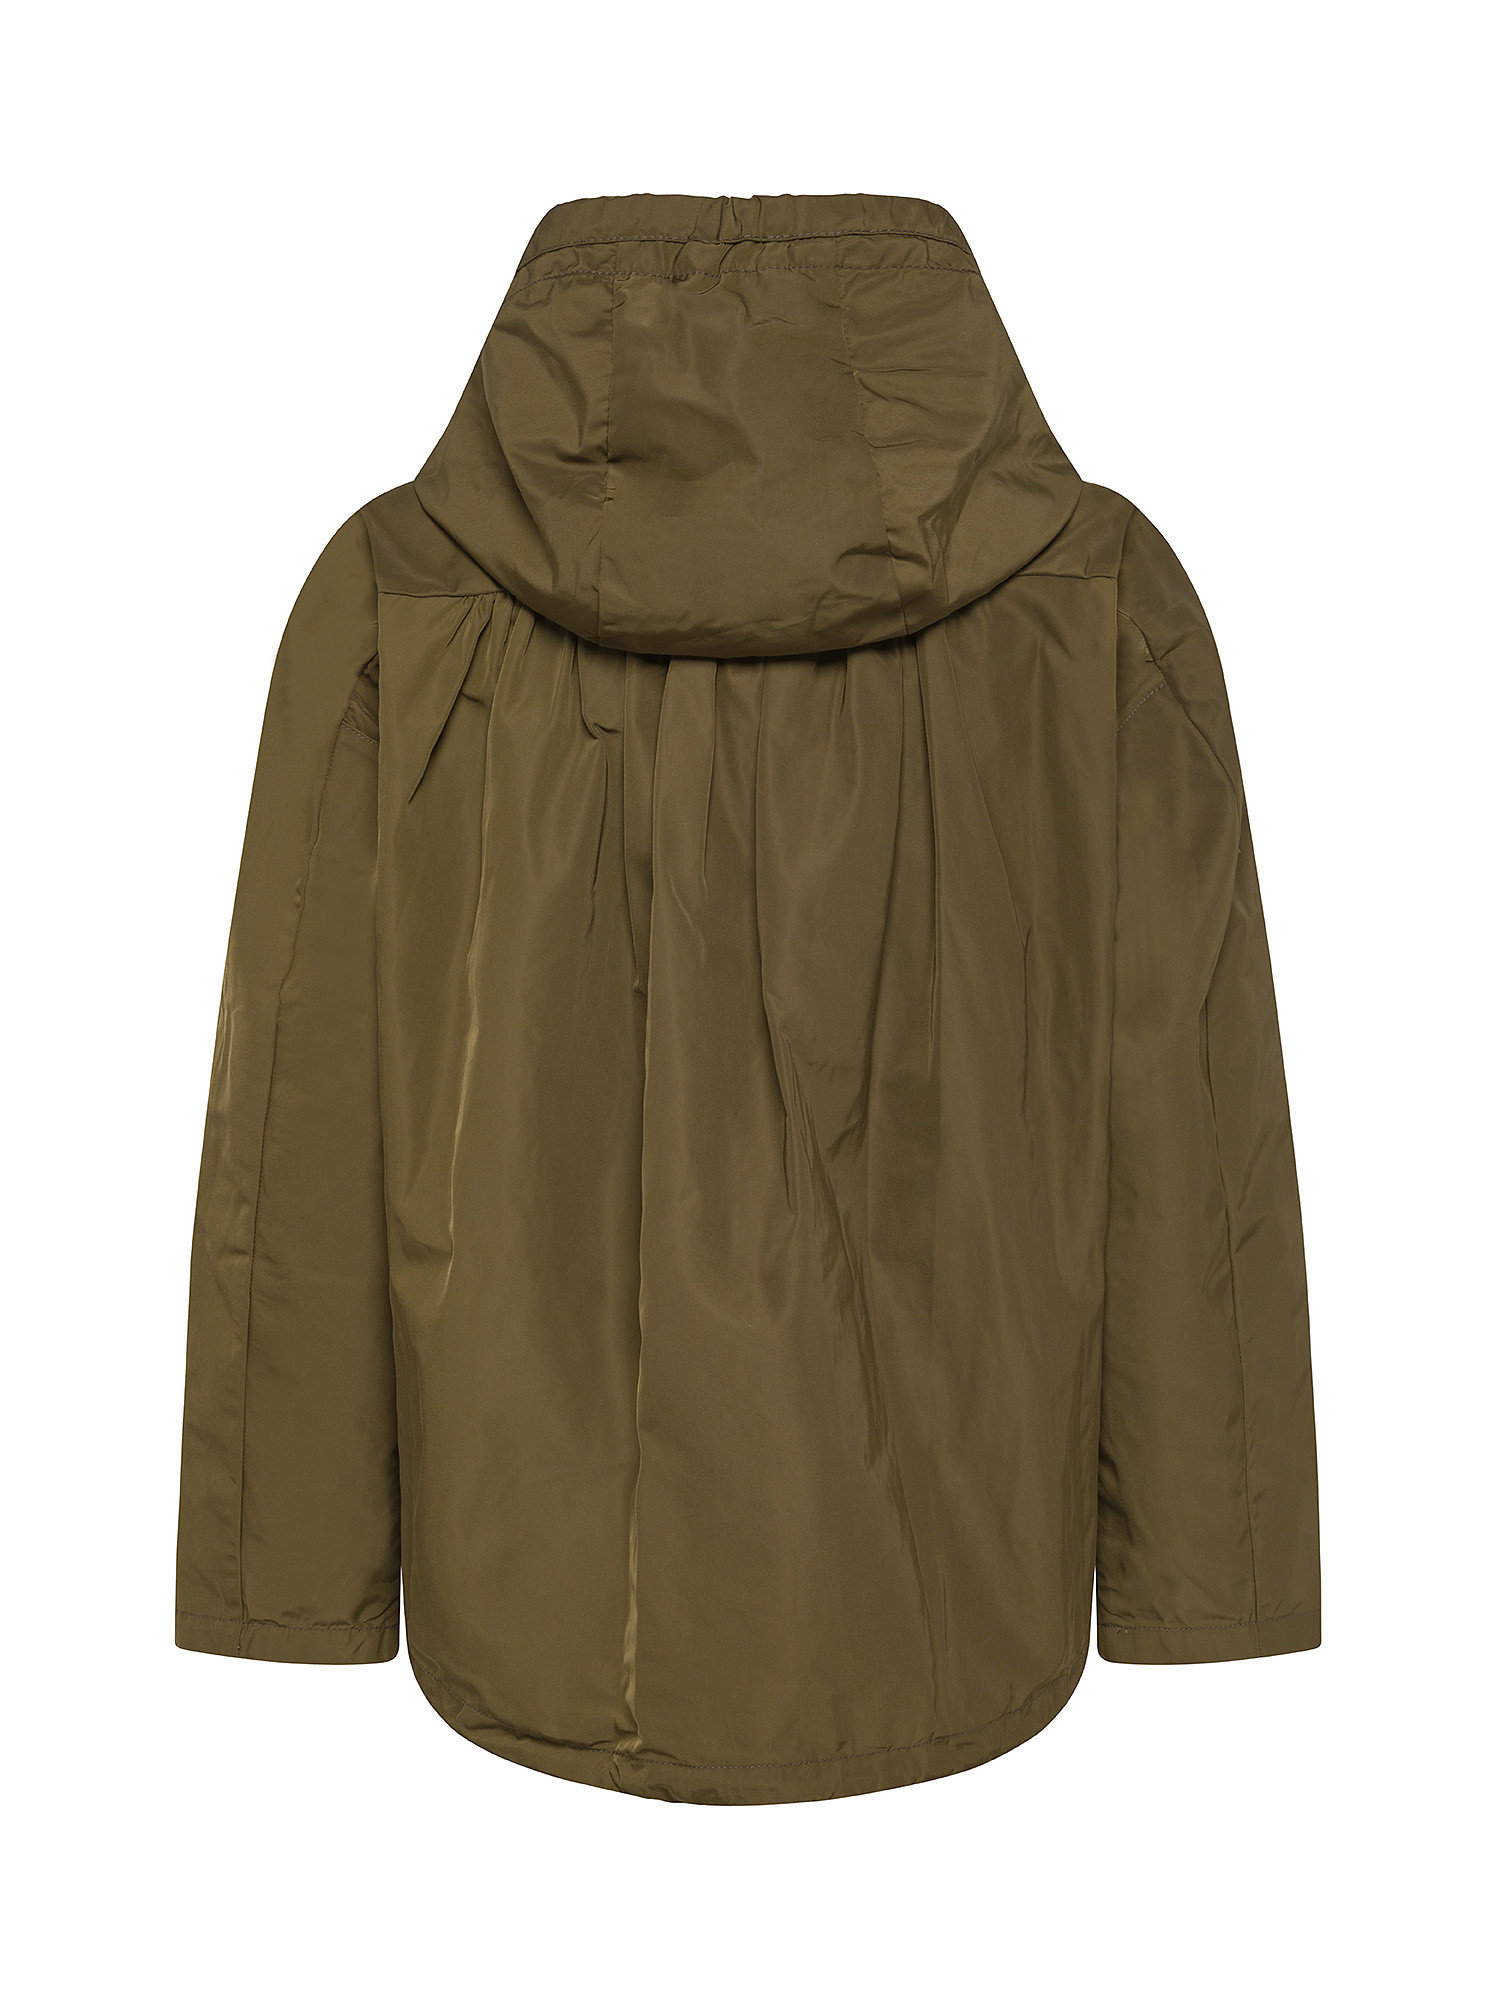 Oof Wear - Unlined cropped jacket with hood, Dark Green, large image number 1